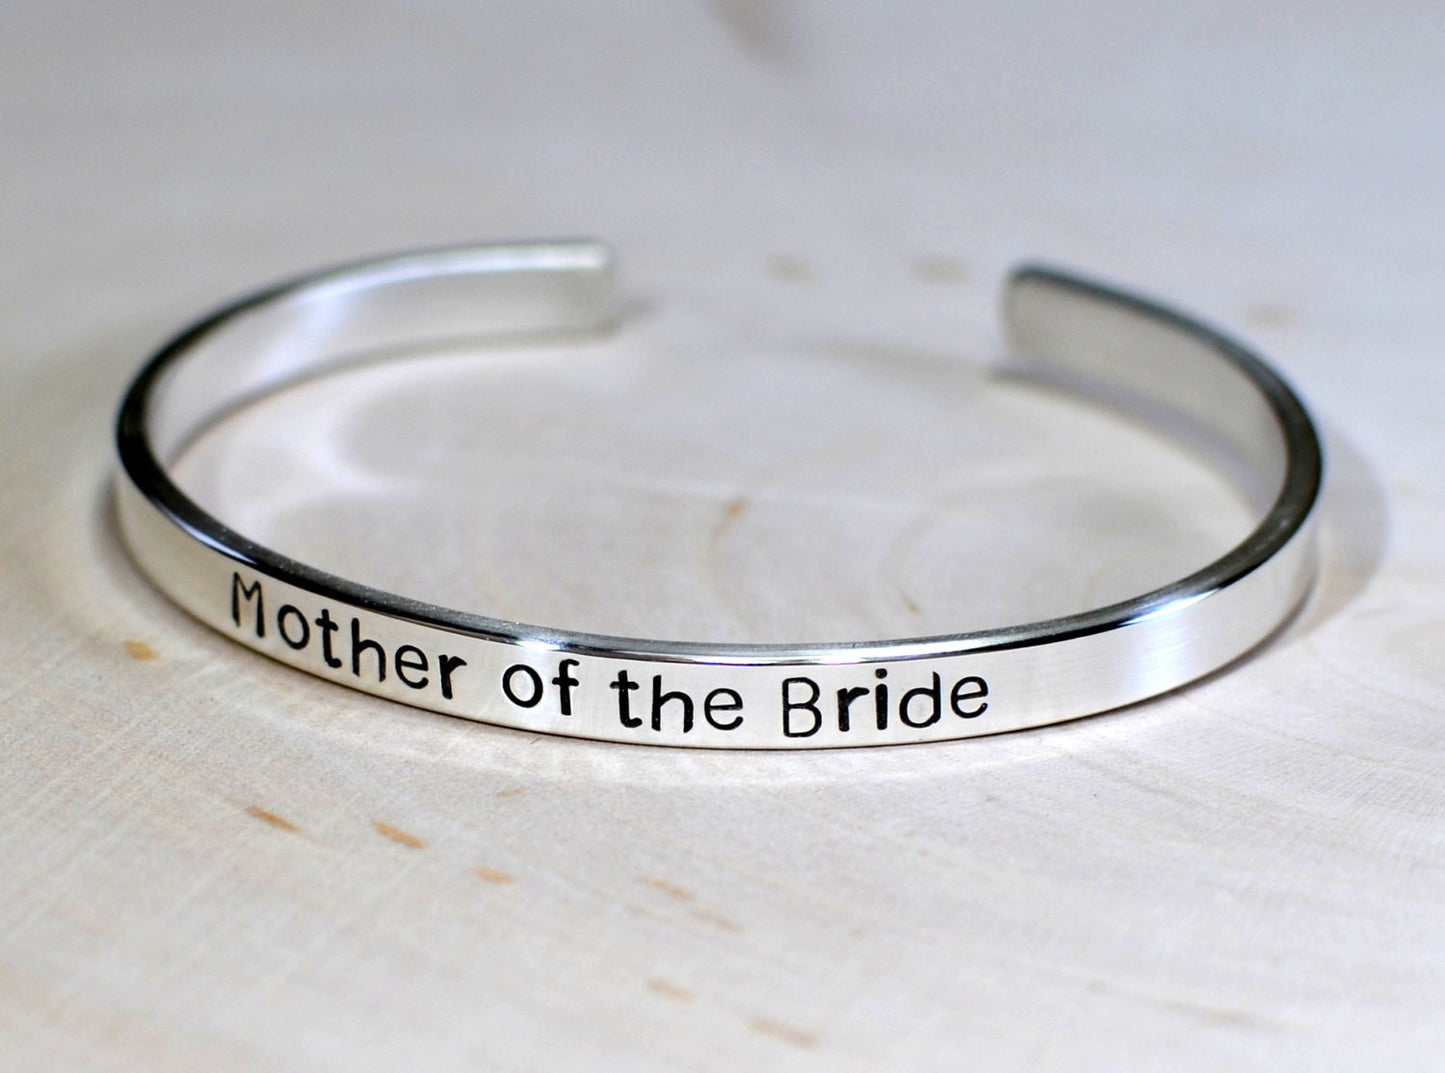 Mother of the Bride Cuff Bracelet in Sterling Silver